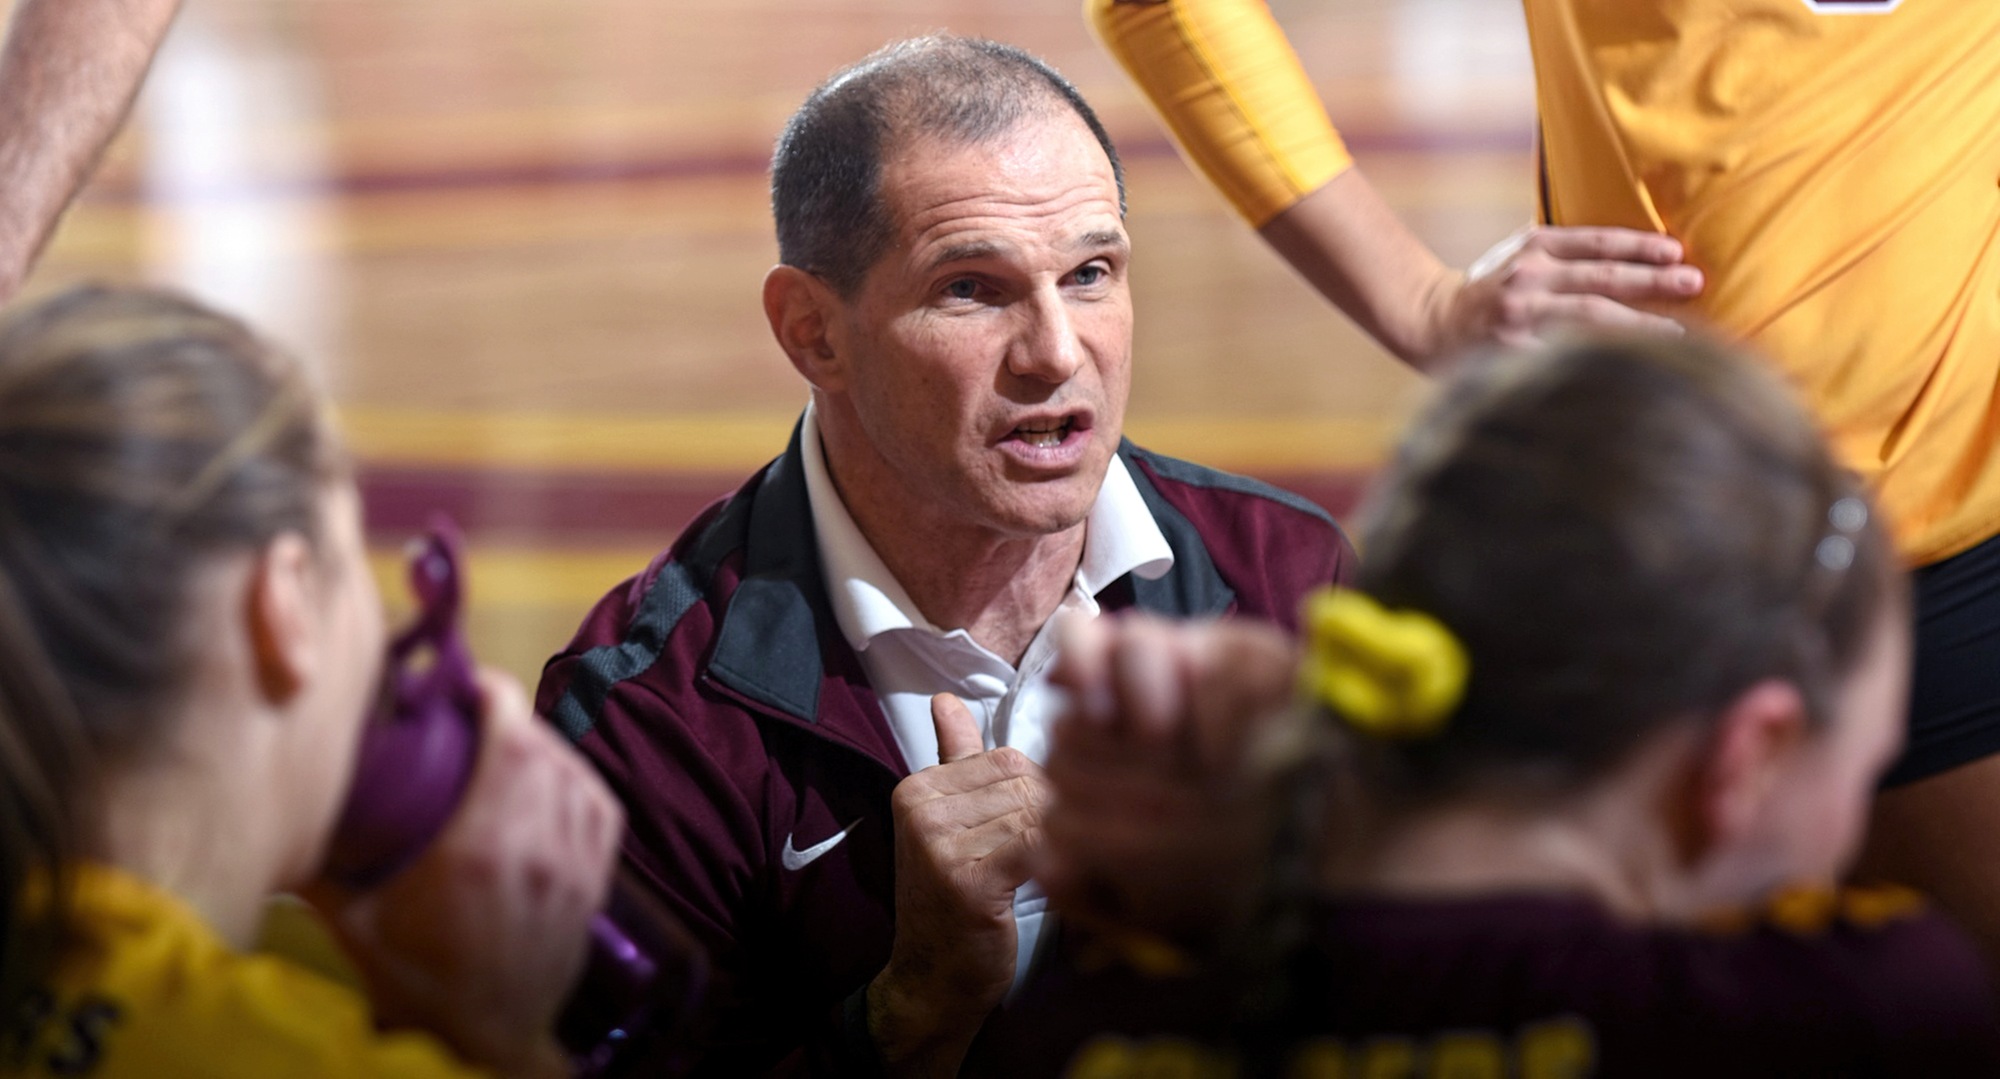 Tim Mosser announced his resignation as head coach of the Cobber volleyball team.